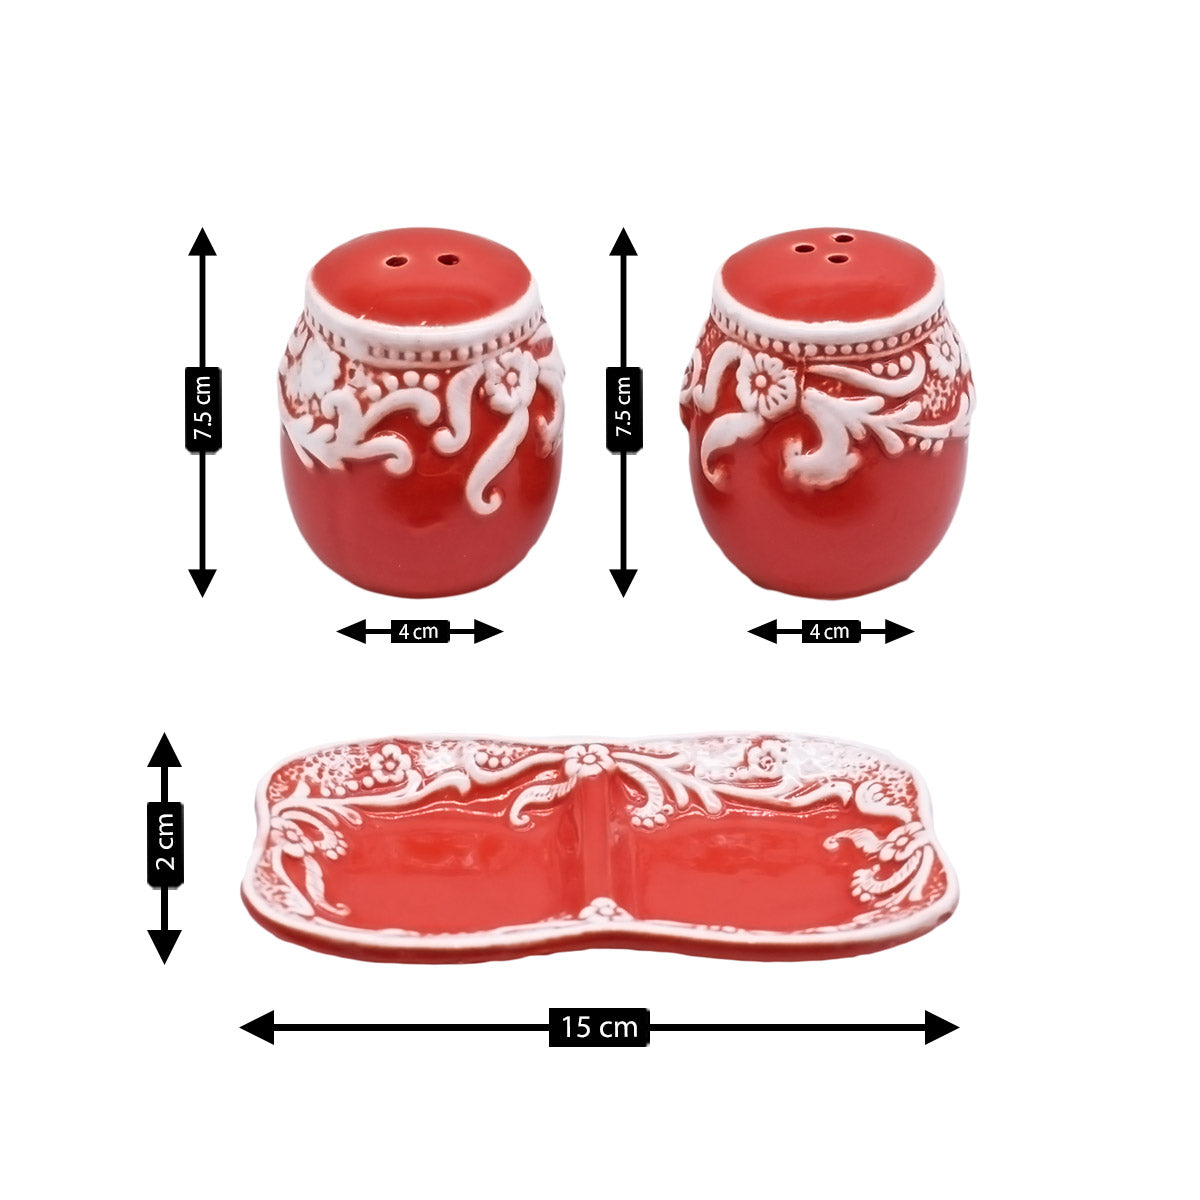 Ceramic Salt and Pepper Set with tray, Floral Design, Red White (8565)